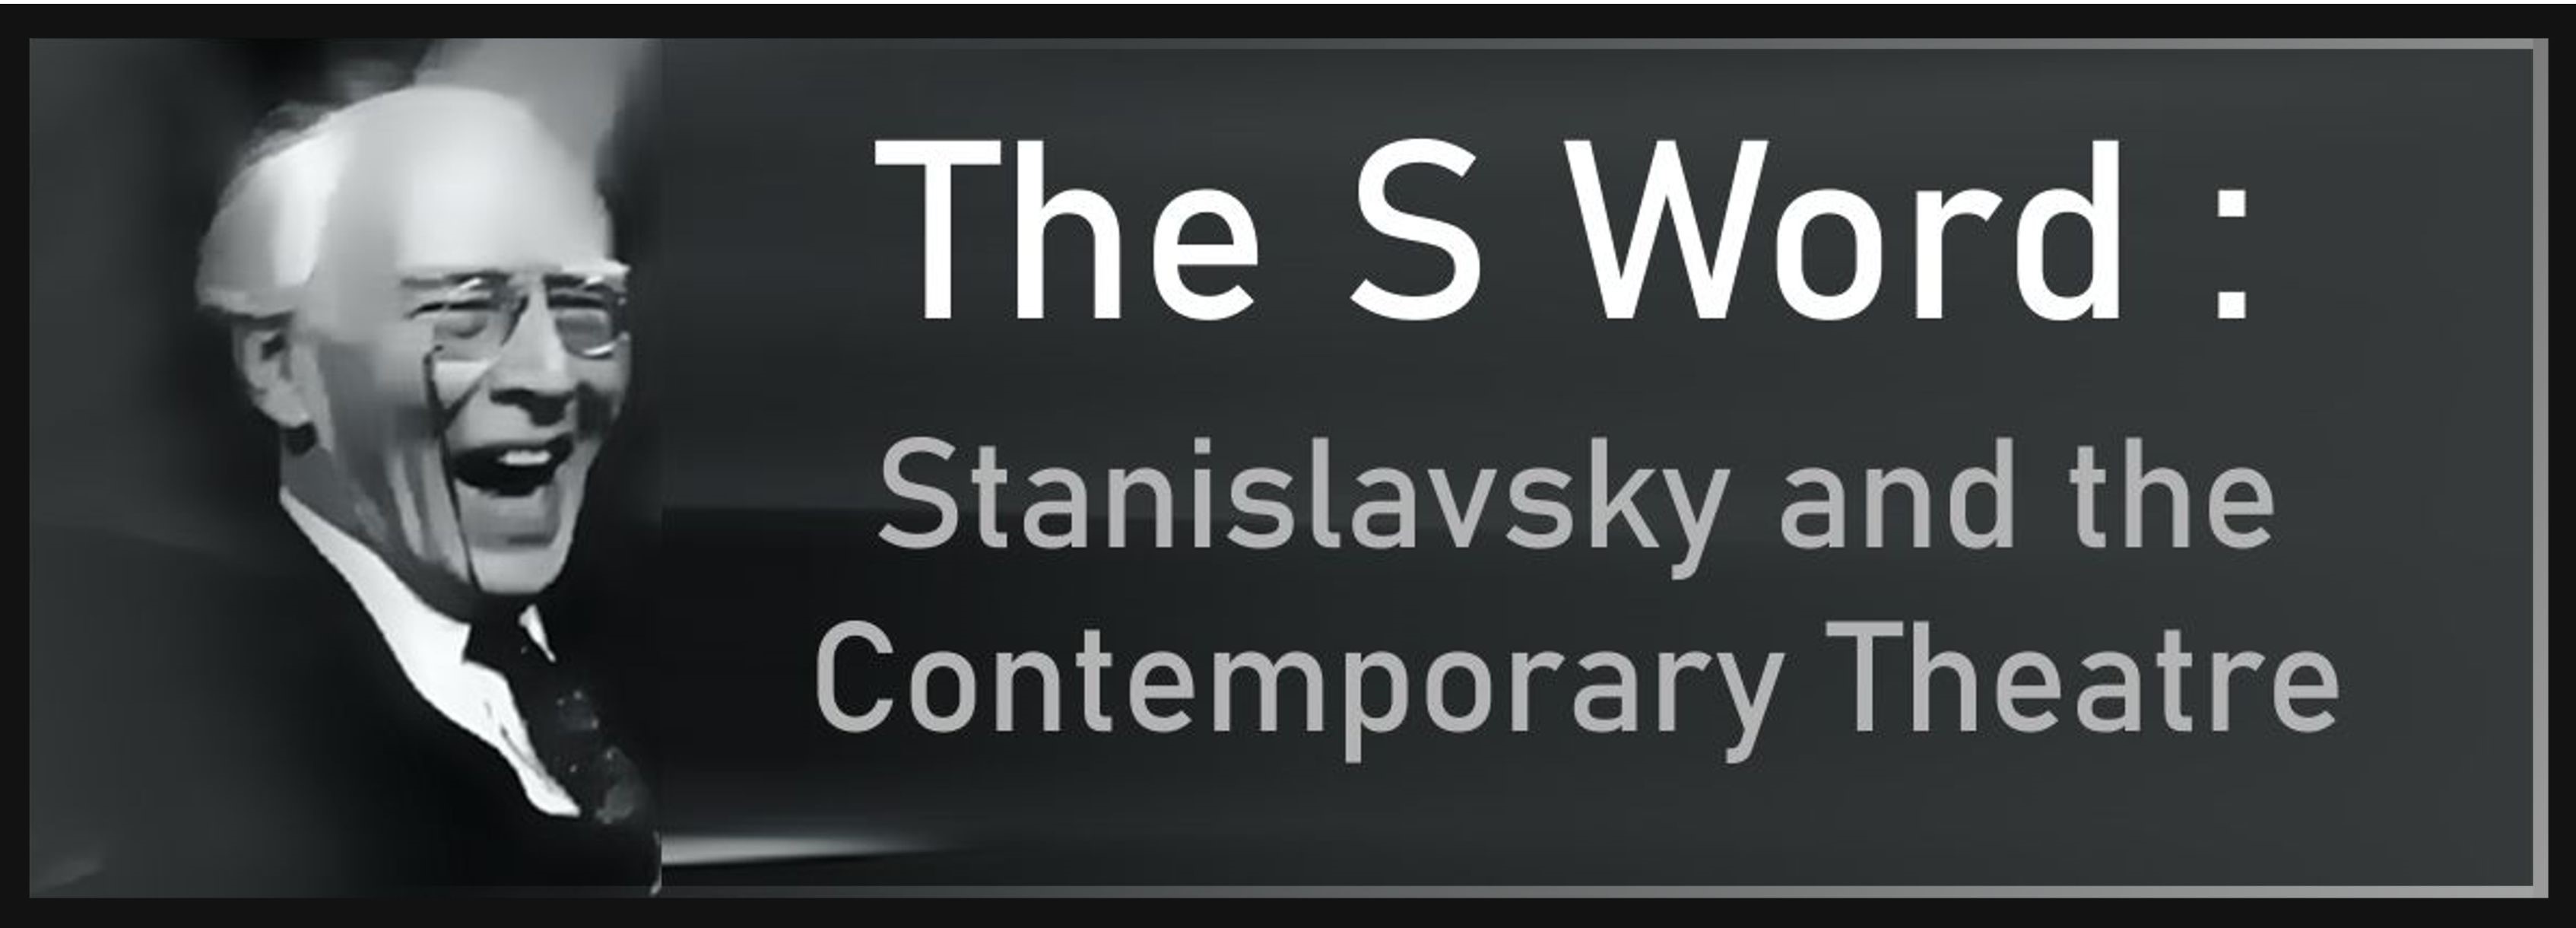 Stanislavsky and the Contemporary Theatre